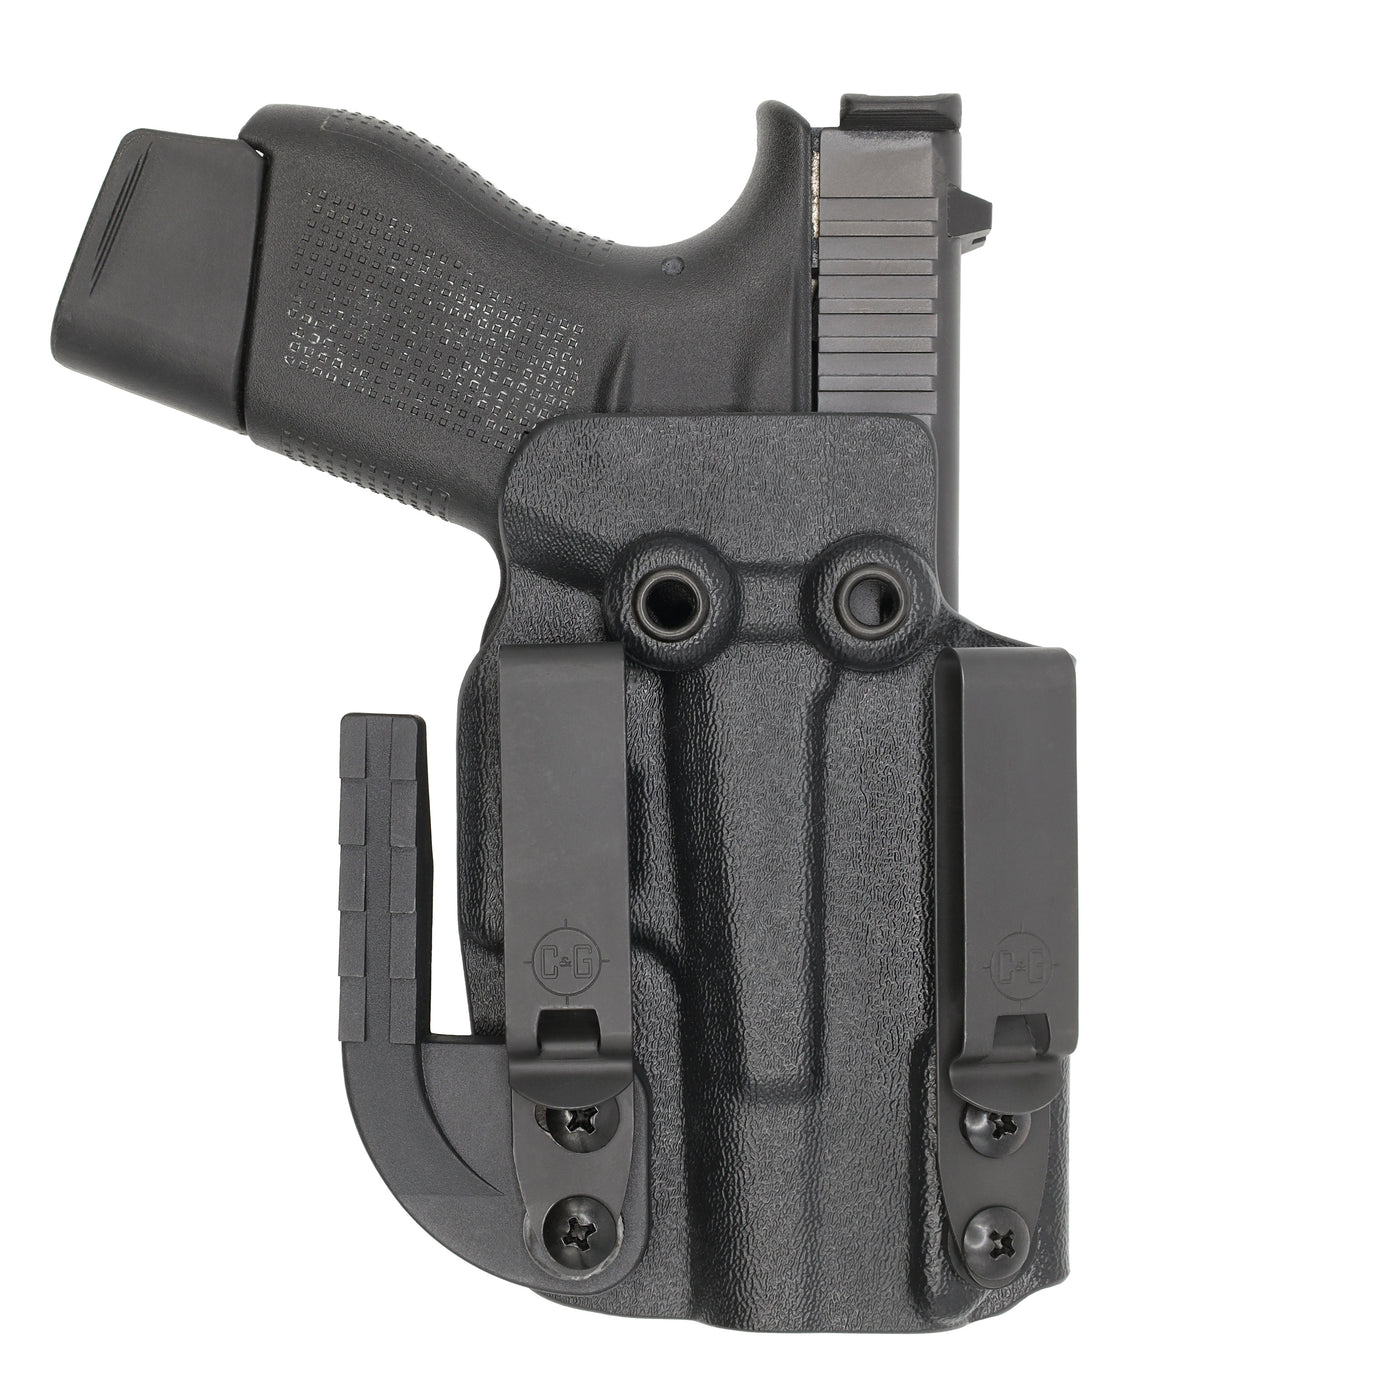 C&G Holsters quickship IWB ALPHA UPGRADE covert Glock 42 in holstered position